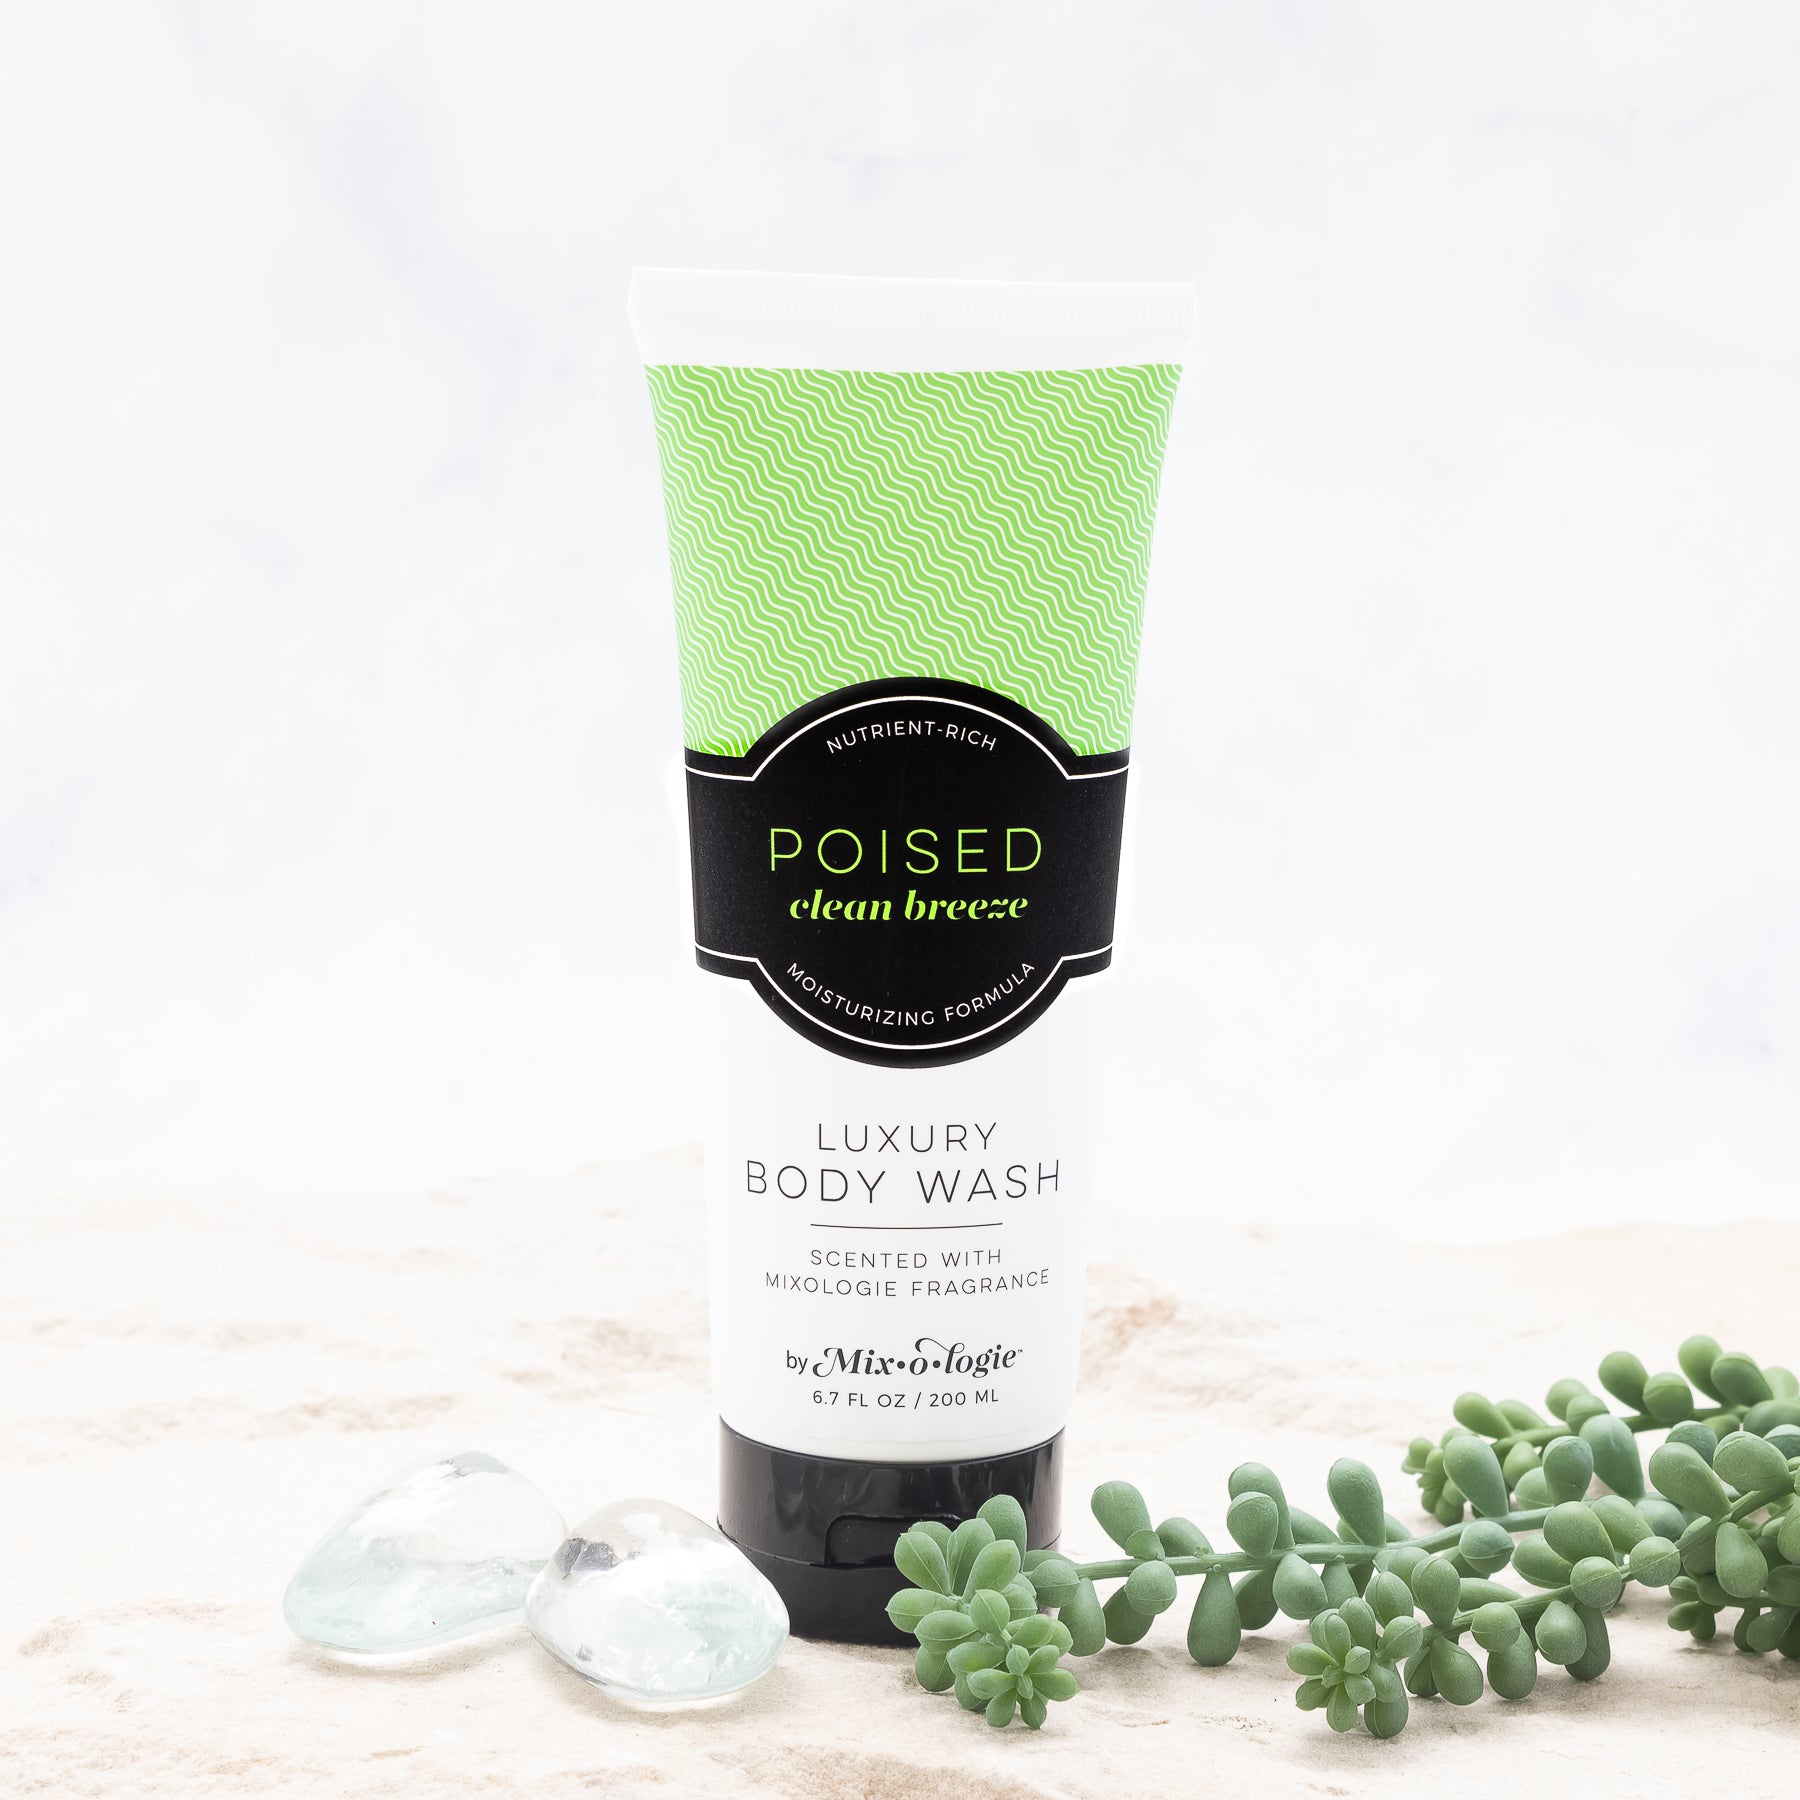 Luxury Body Wash of Poised (Clean Breeze) in light green pattern package and black label with sand, rocks, and greenery.